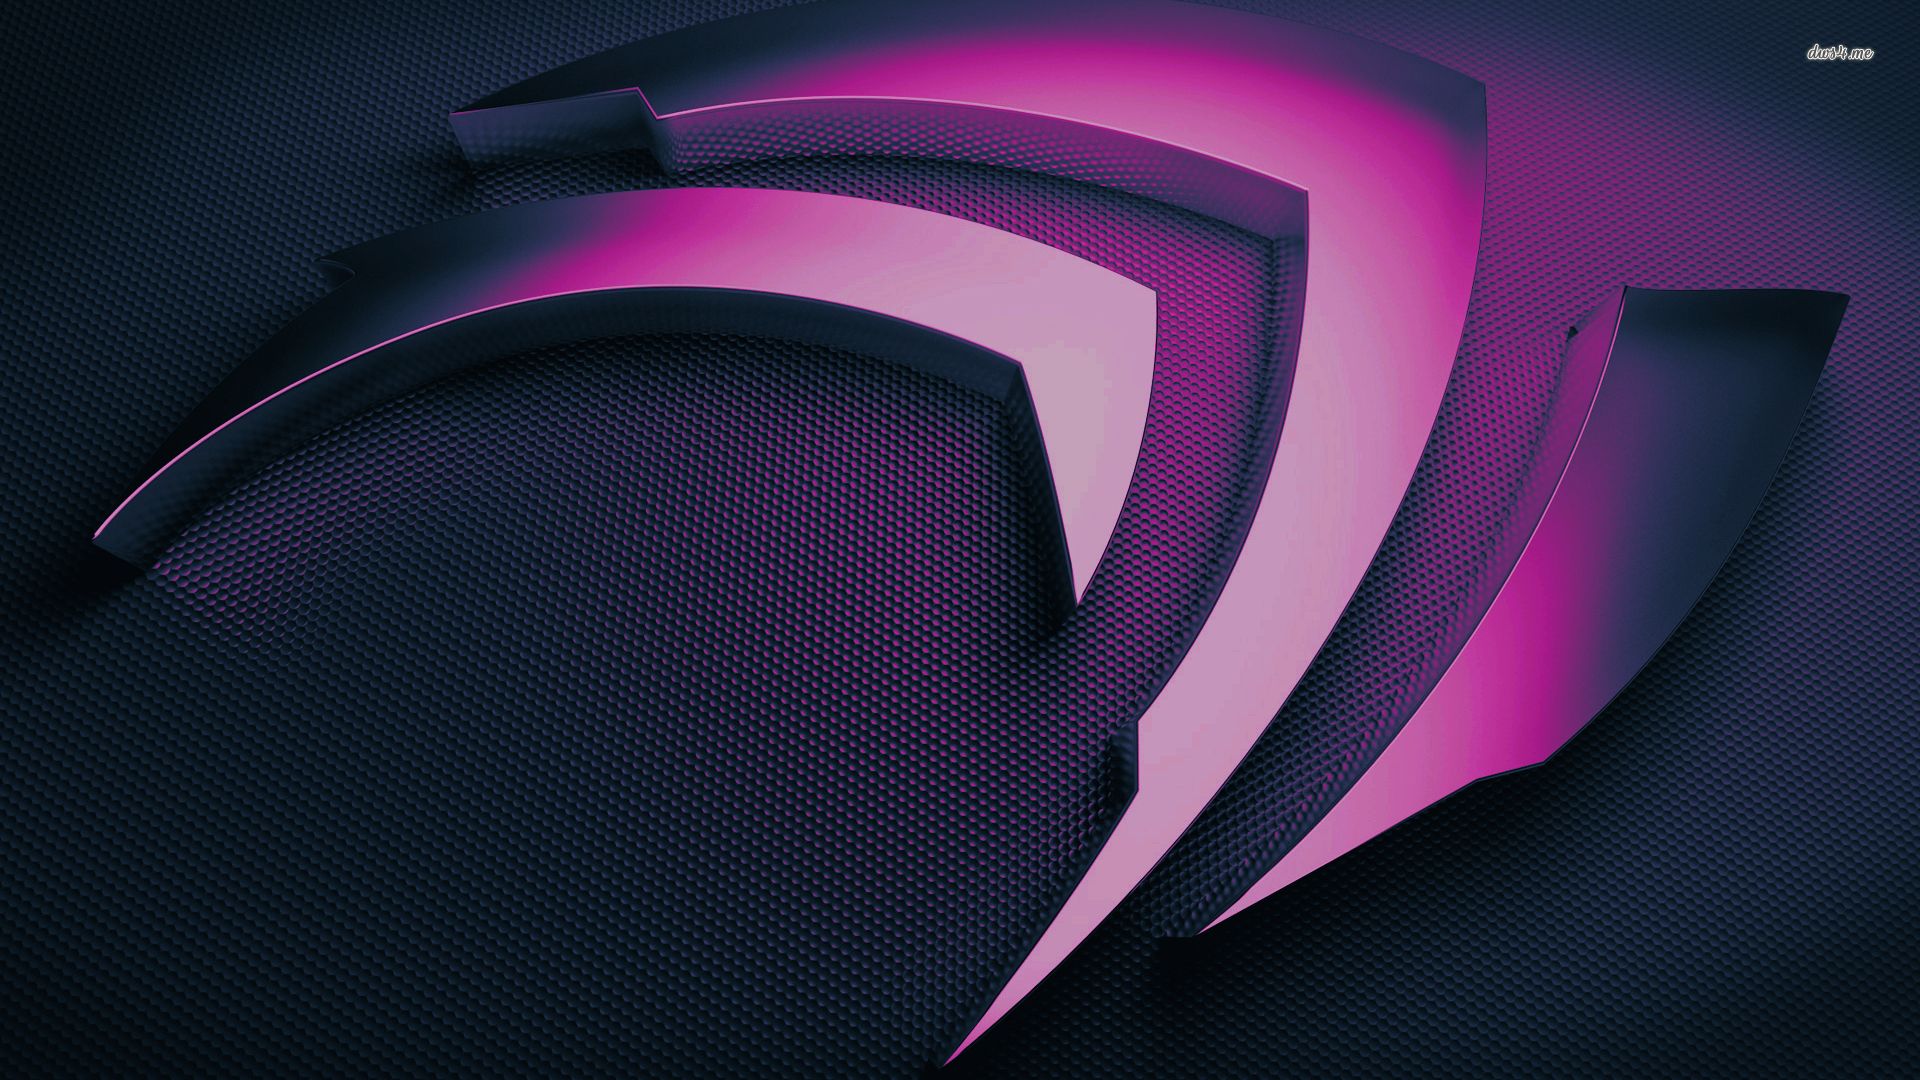 Desktop Pink Gamer Wallpapers Wallpaper Cave Here you can find the best pink computer wallpapers uploaded by our community. desktop pink gamer wallpapers